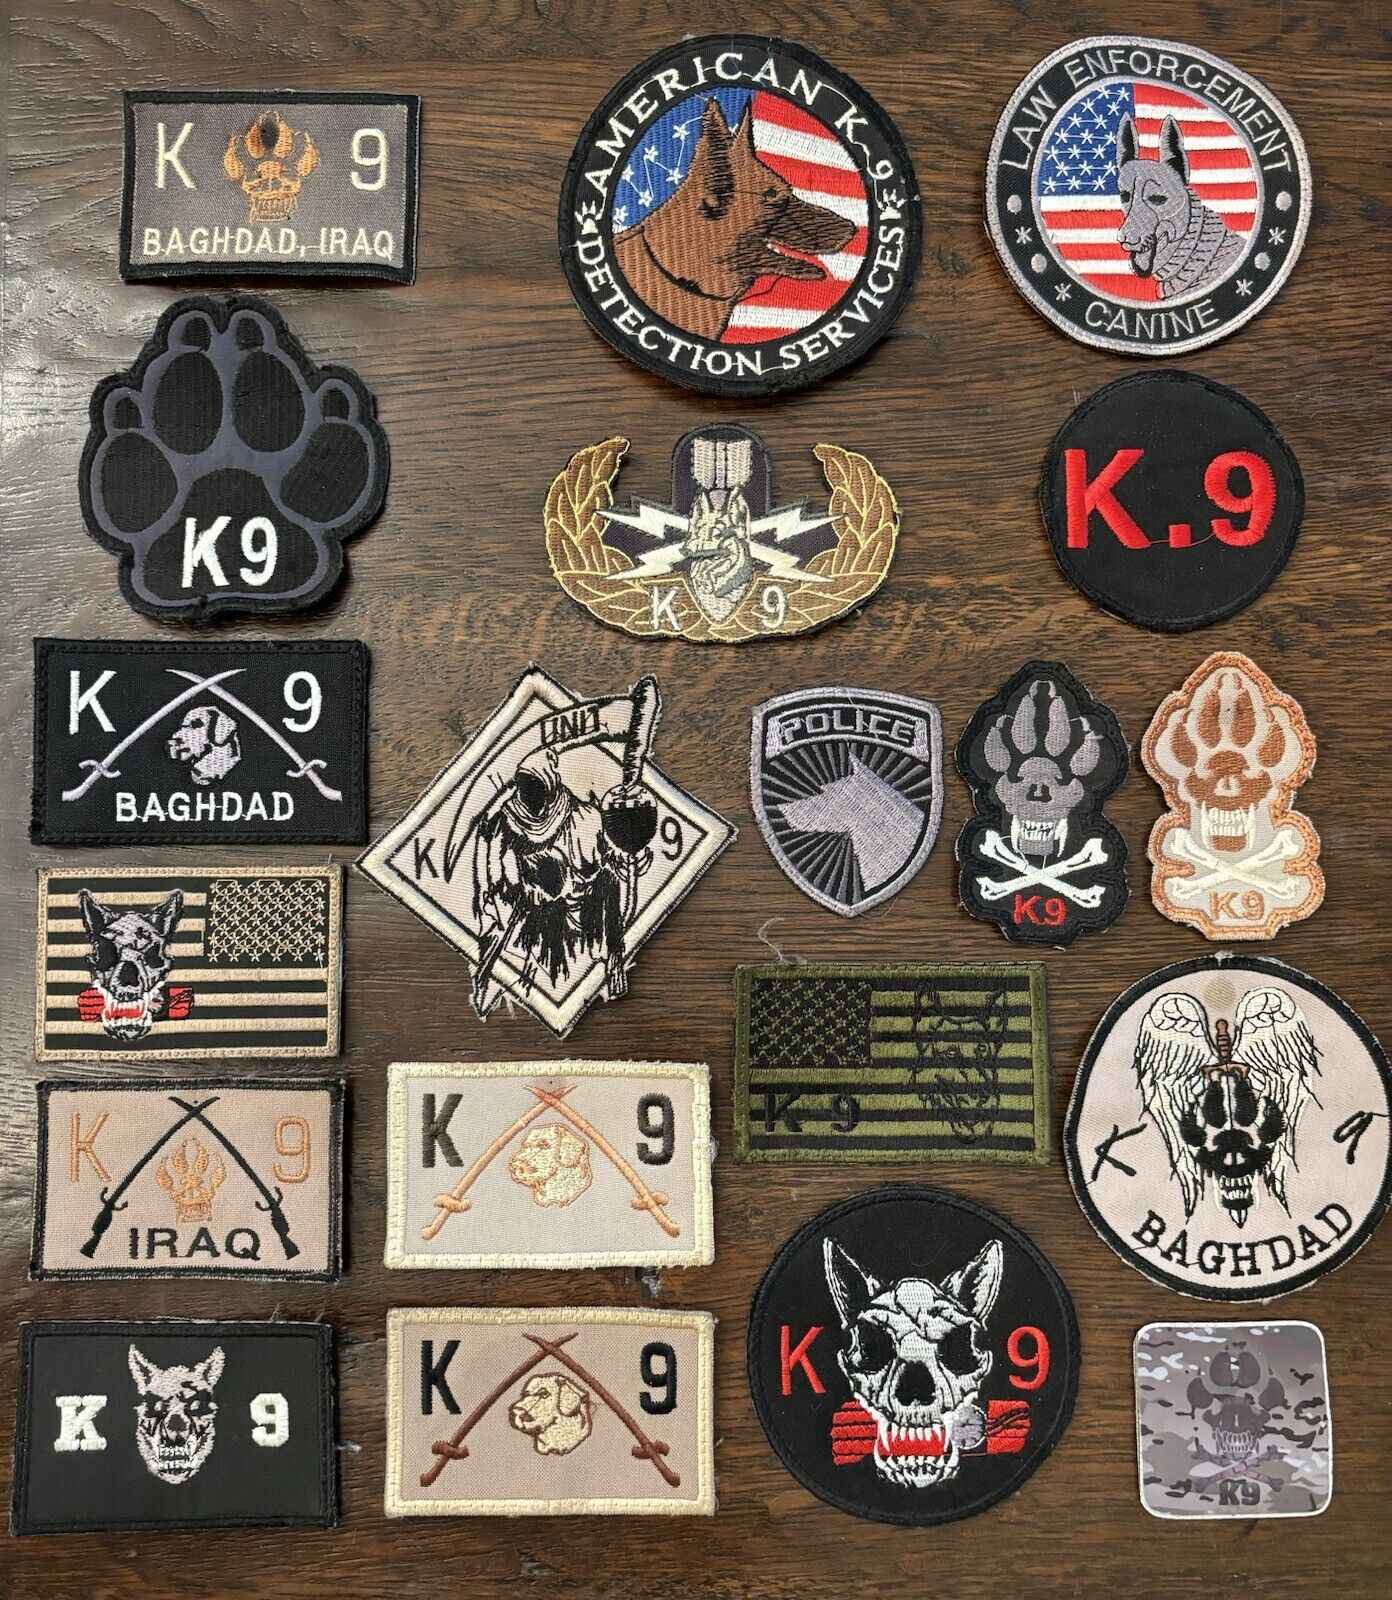 Amazing US (1 UK) Military Dog Handler Iraq Made Patch Grouping - 21 New Patches